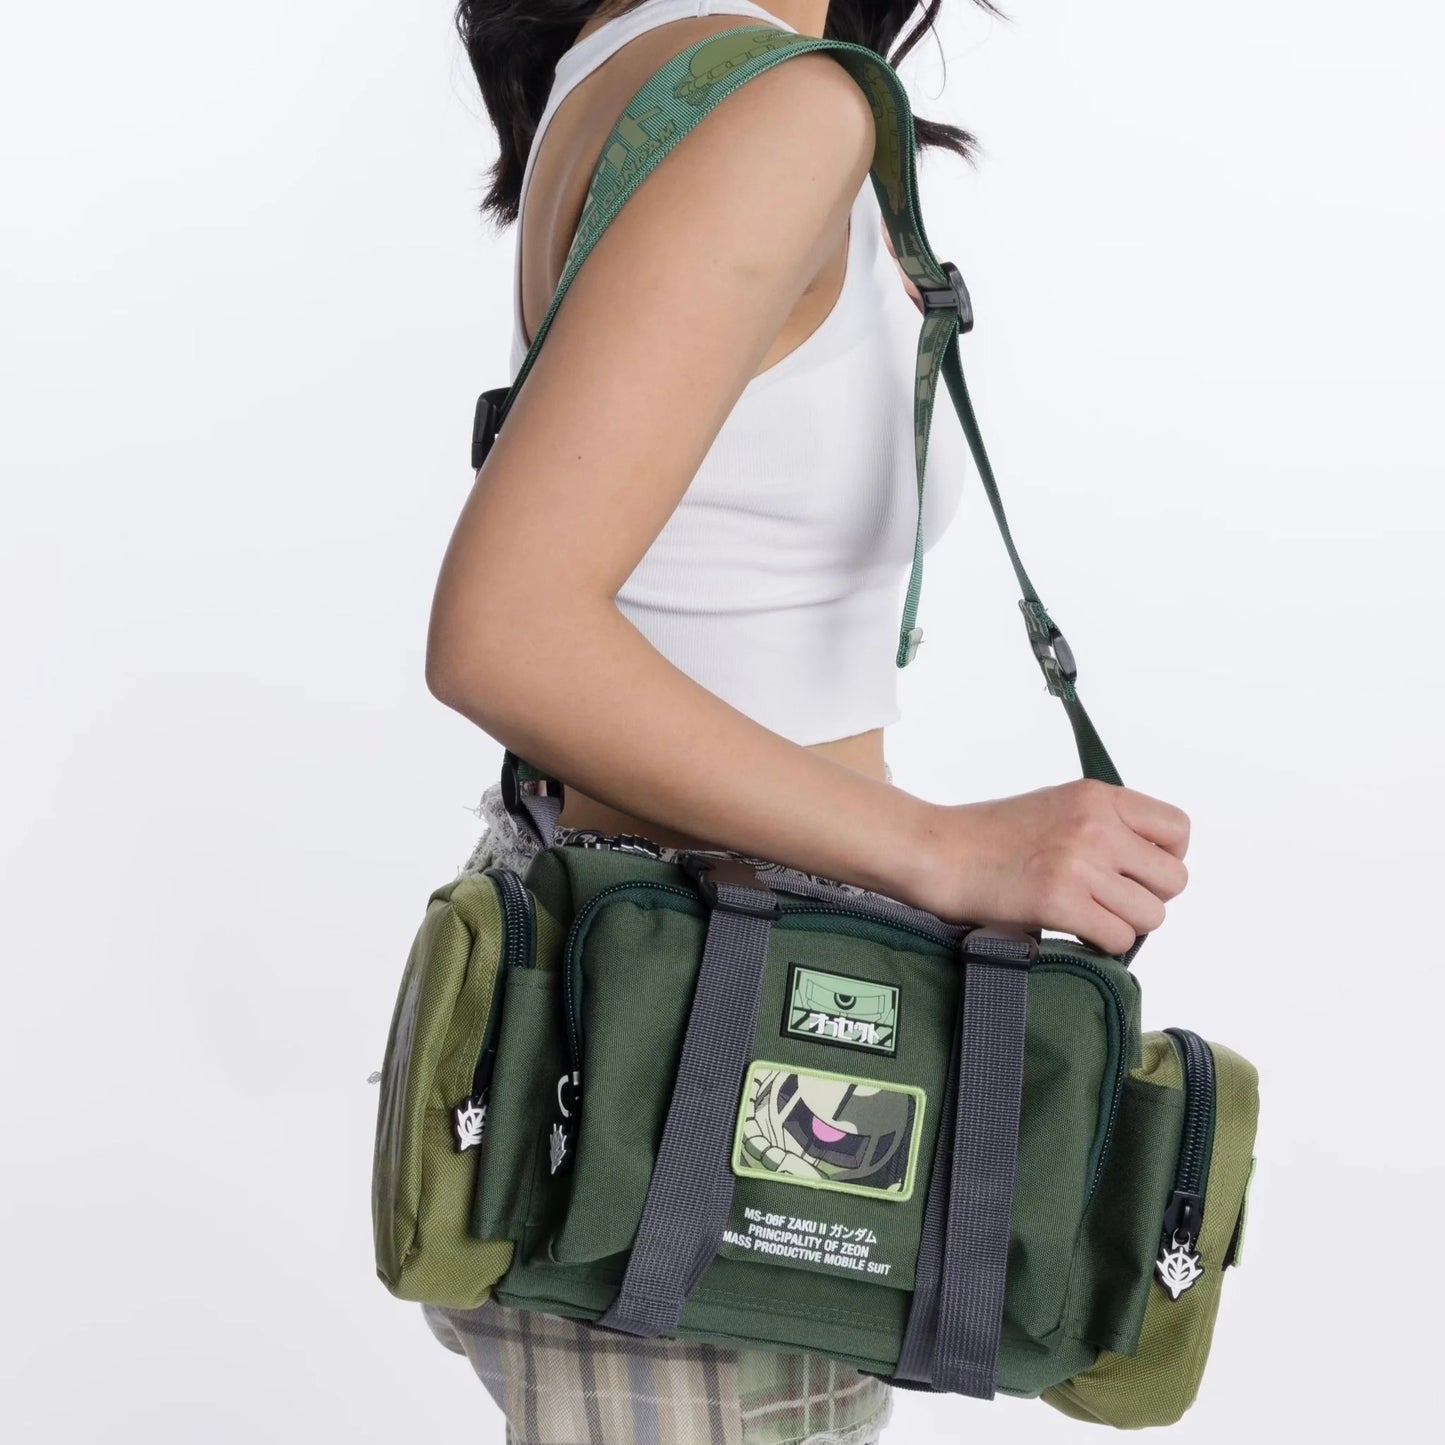 SHWA -Green Zaku Mini Duffle with Strap (Pre-Order) Patches Included